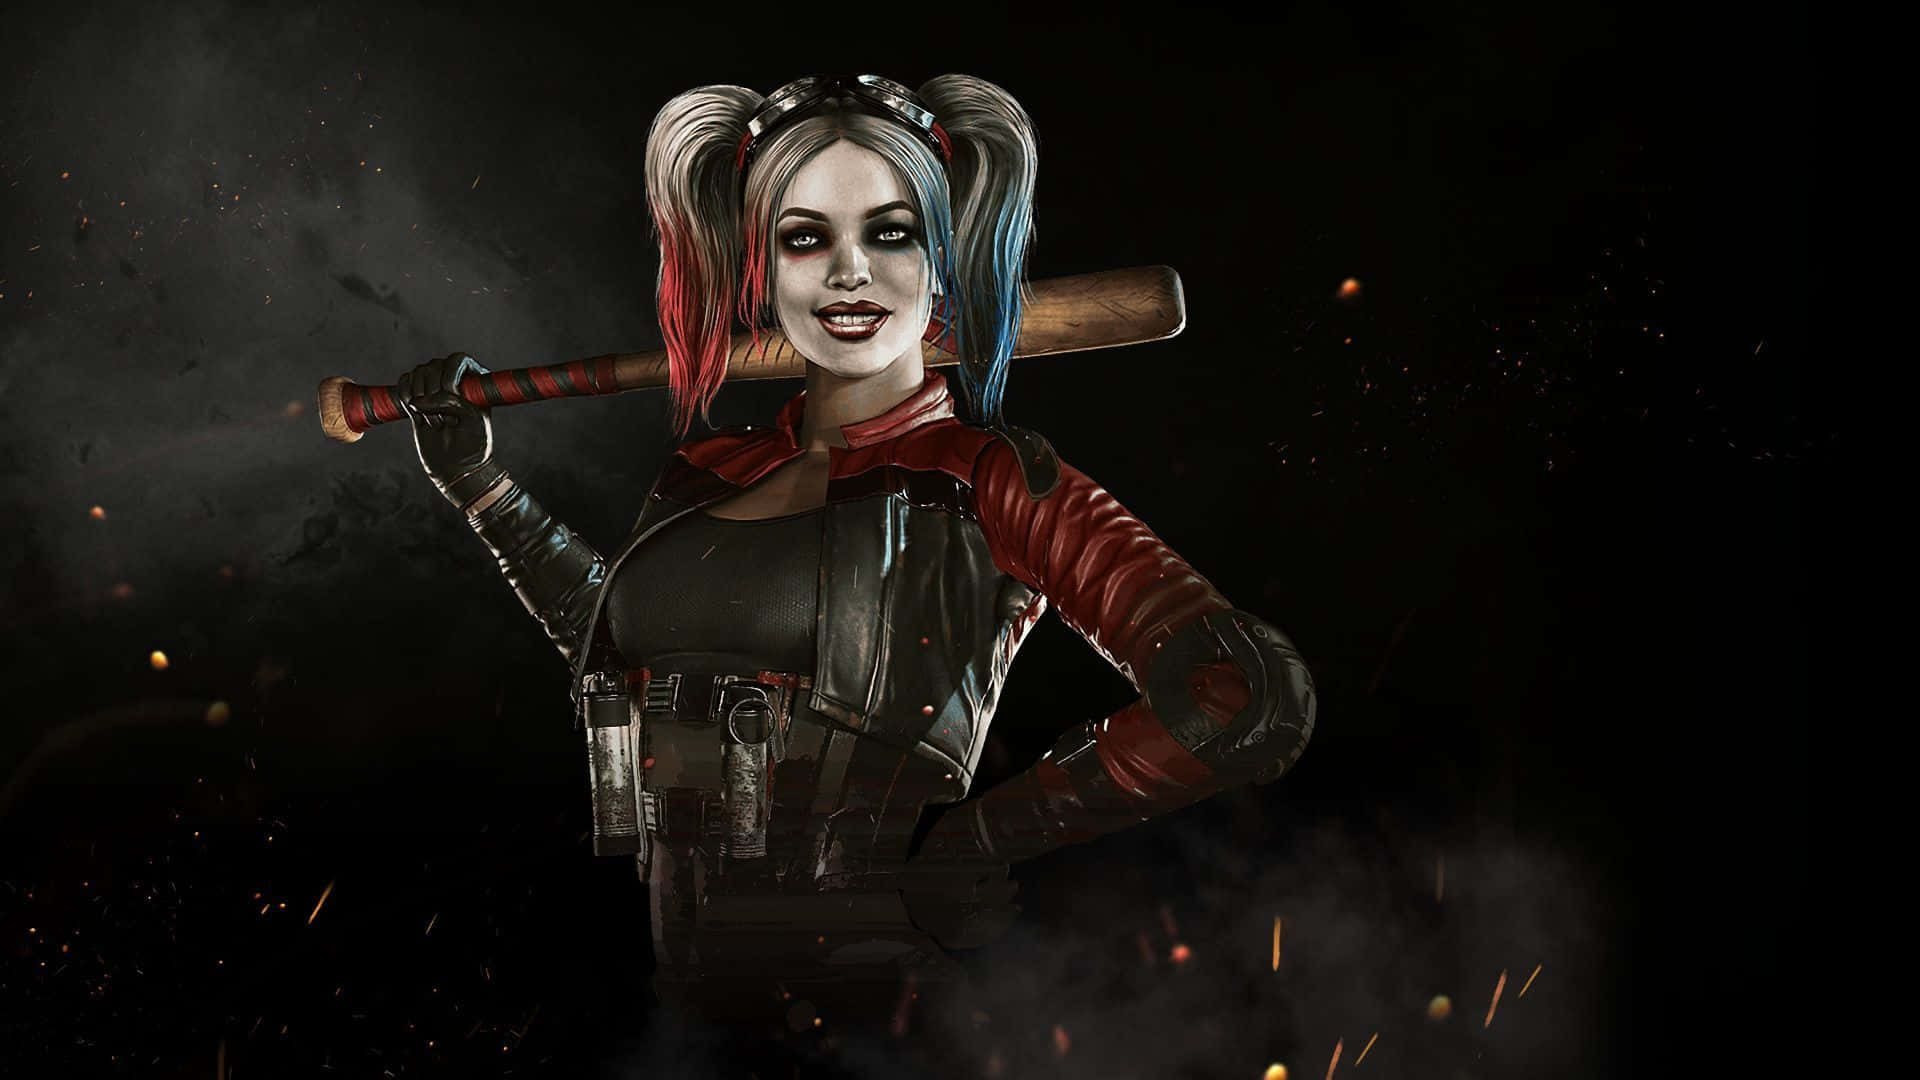 Harley Quinn is saying "Let's Rock 'n' Roll" in Injustice 2. Wallpaper